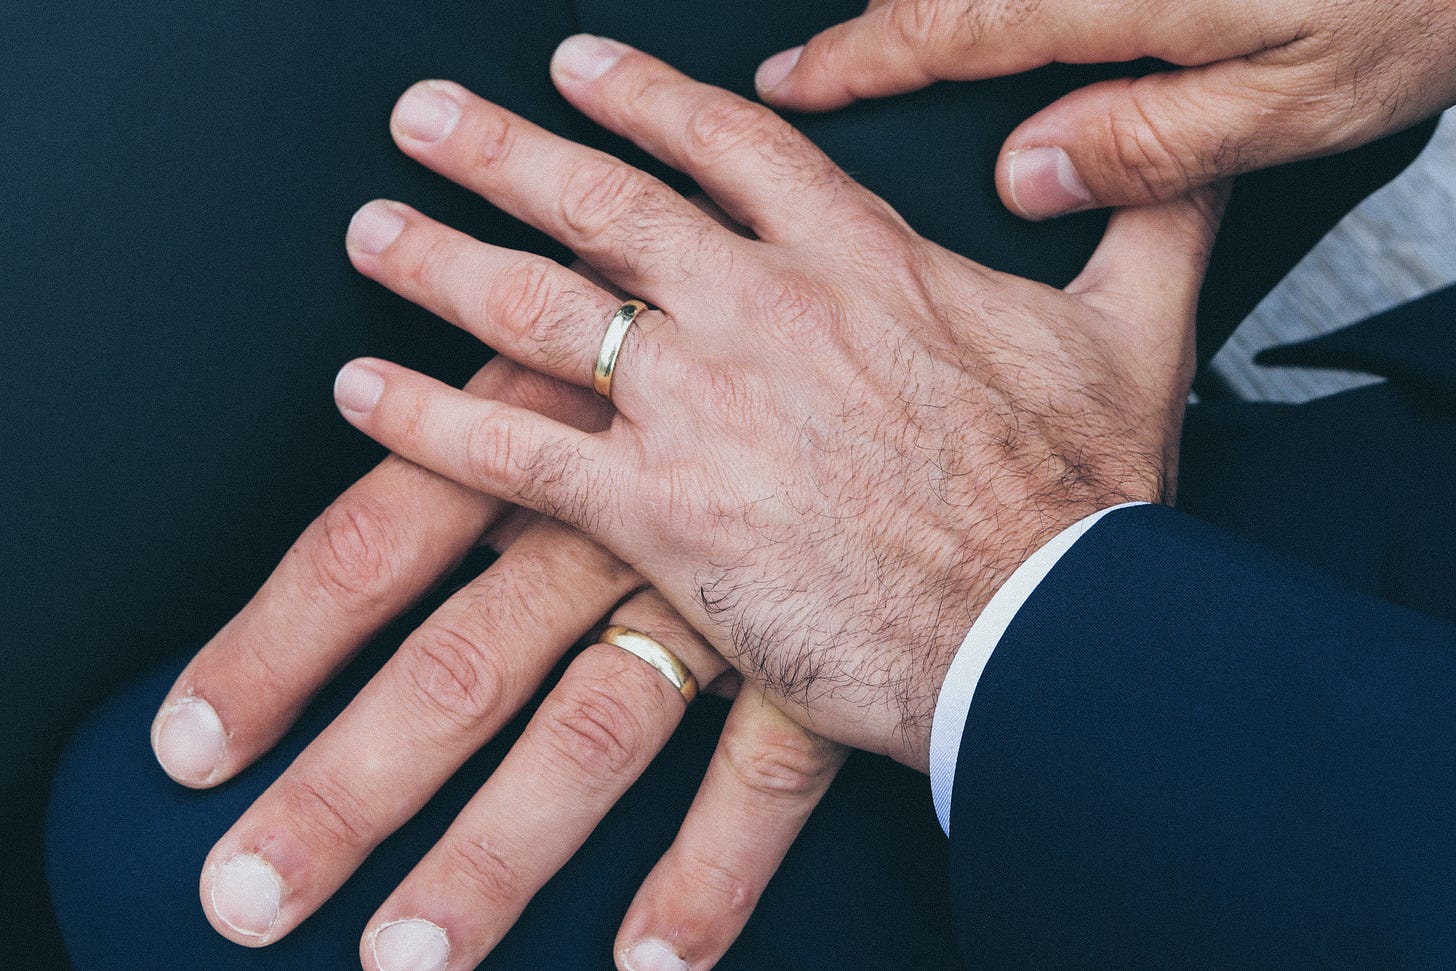 Two men's hands with wedding rings